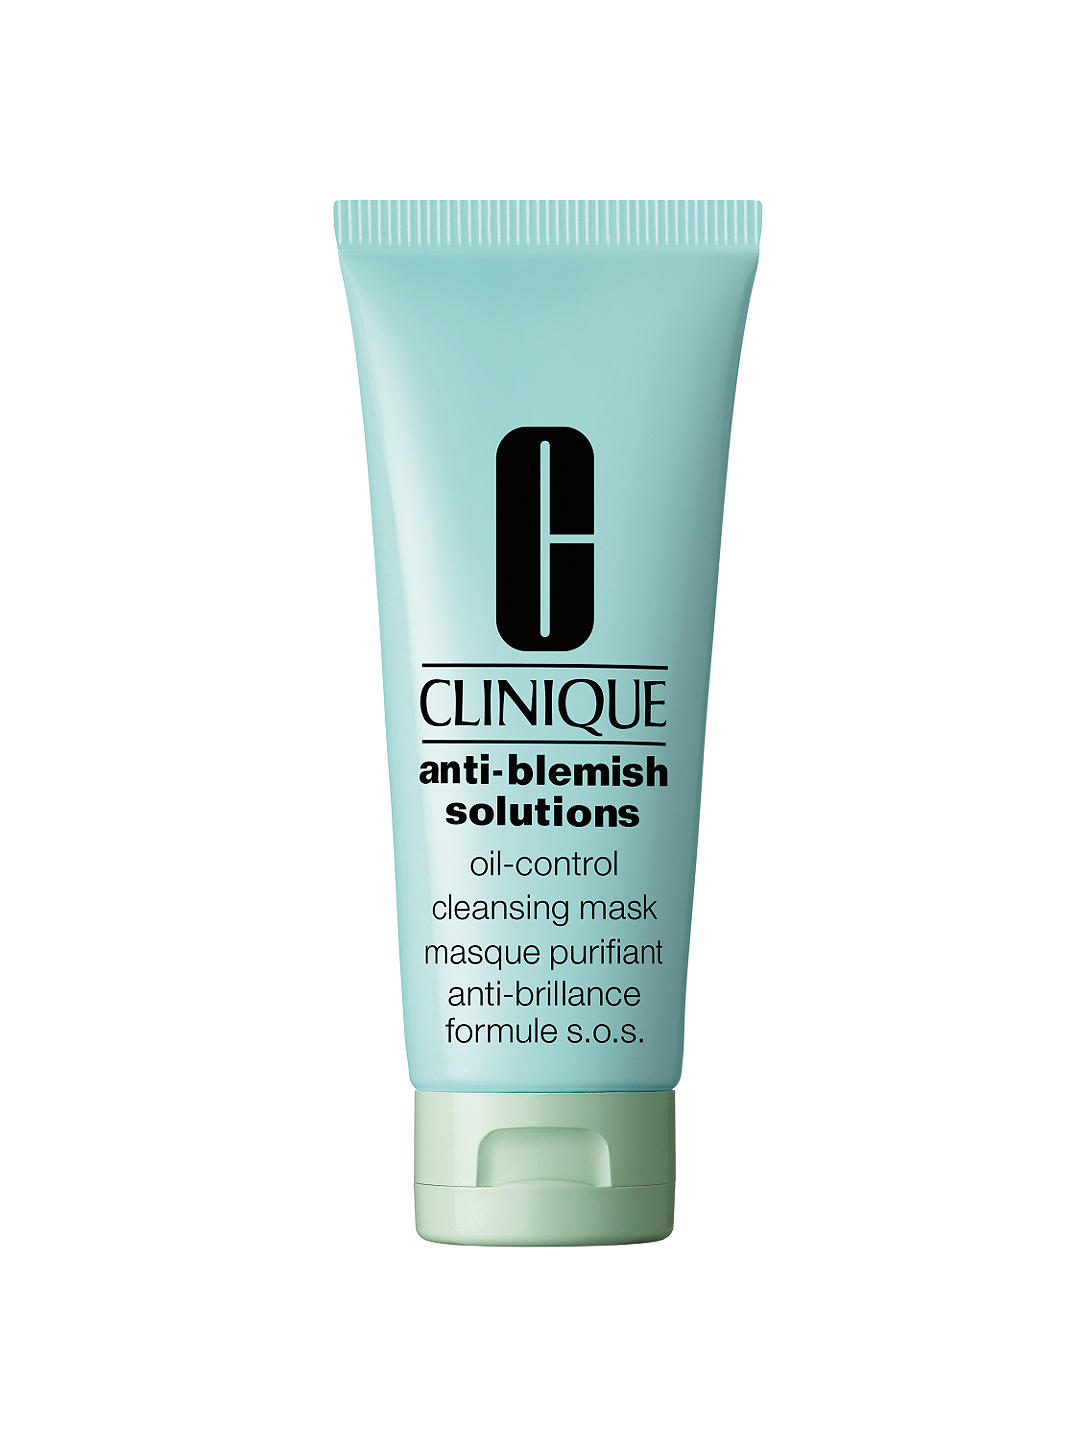 Clinique Anti-Blemish Solutions Oil Control Cleansing Mask - All Skin Types With Blemishes, 100ml 1